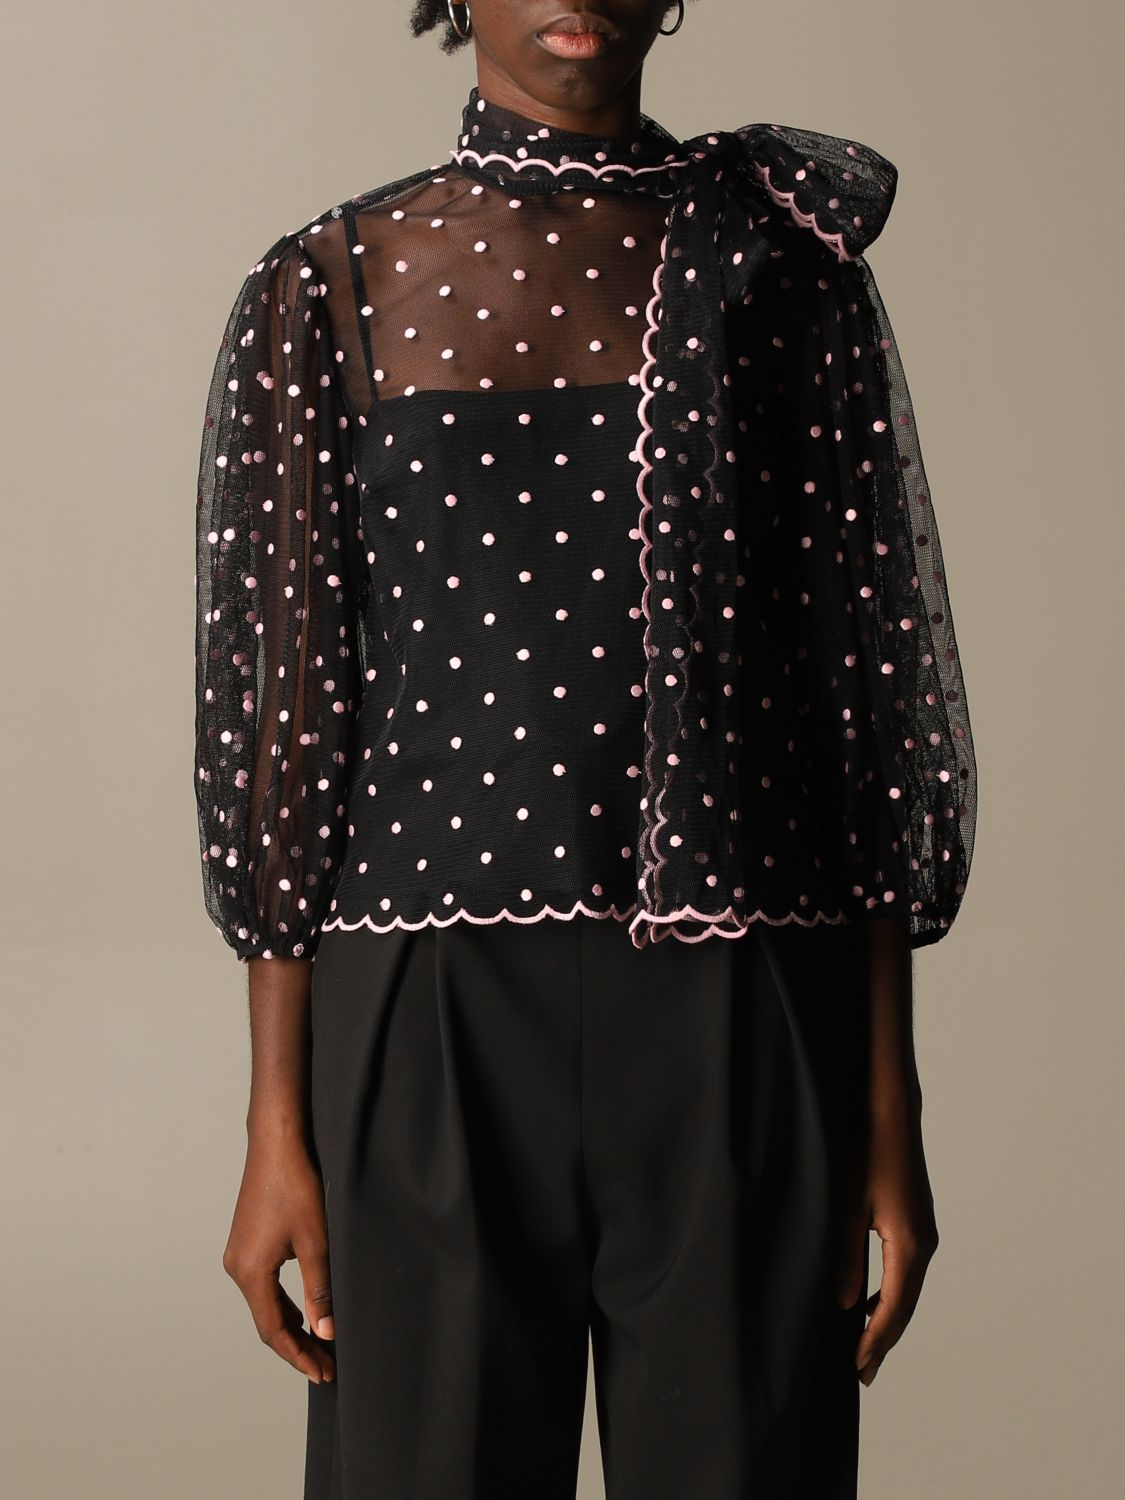 mei mot samenzwering Red Valentino Outlet: polka dot tulle shirt - Black | Red Valentino top  UR0AA02J 5KU online on GIGLIO.COM